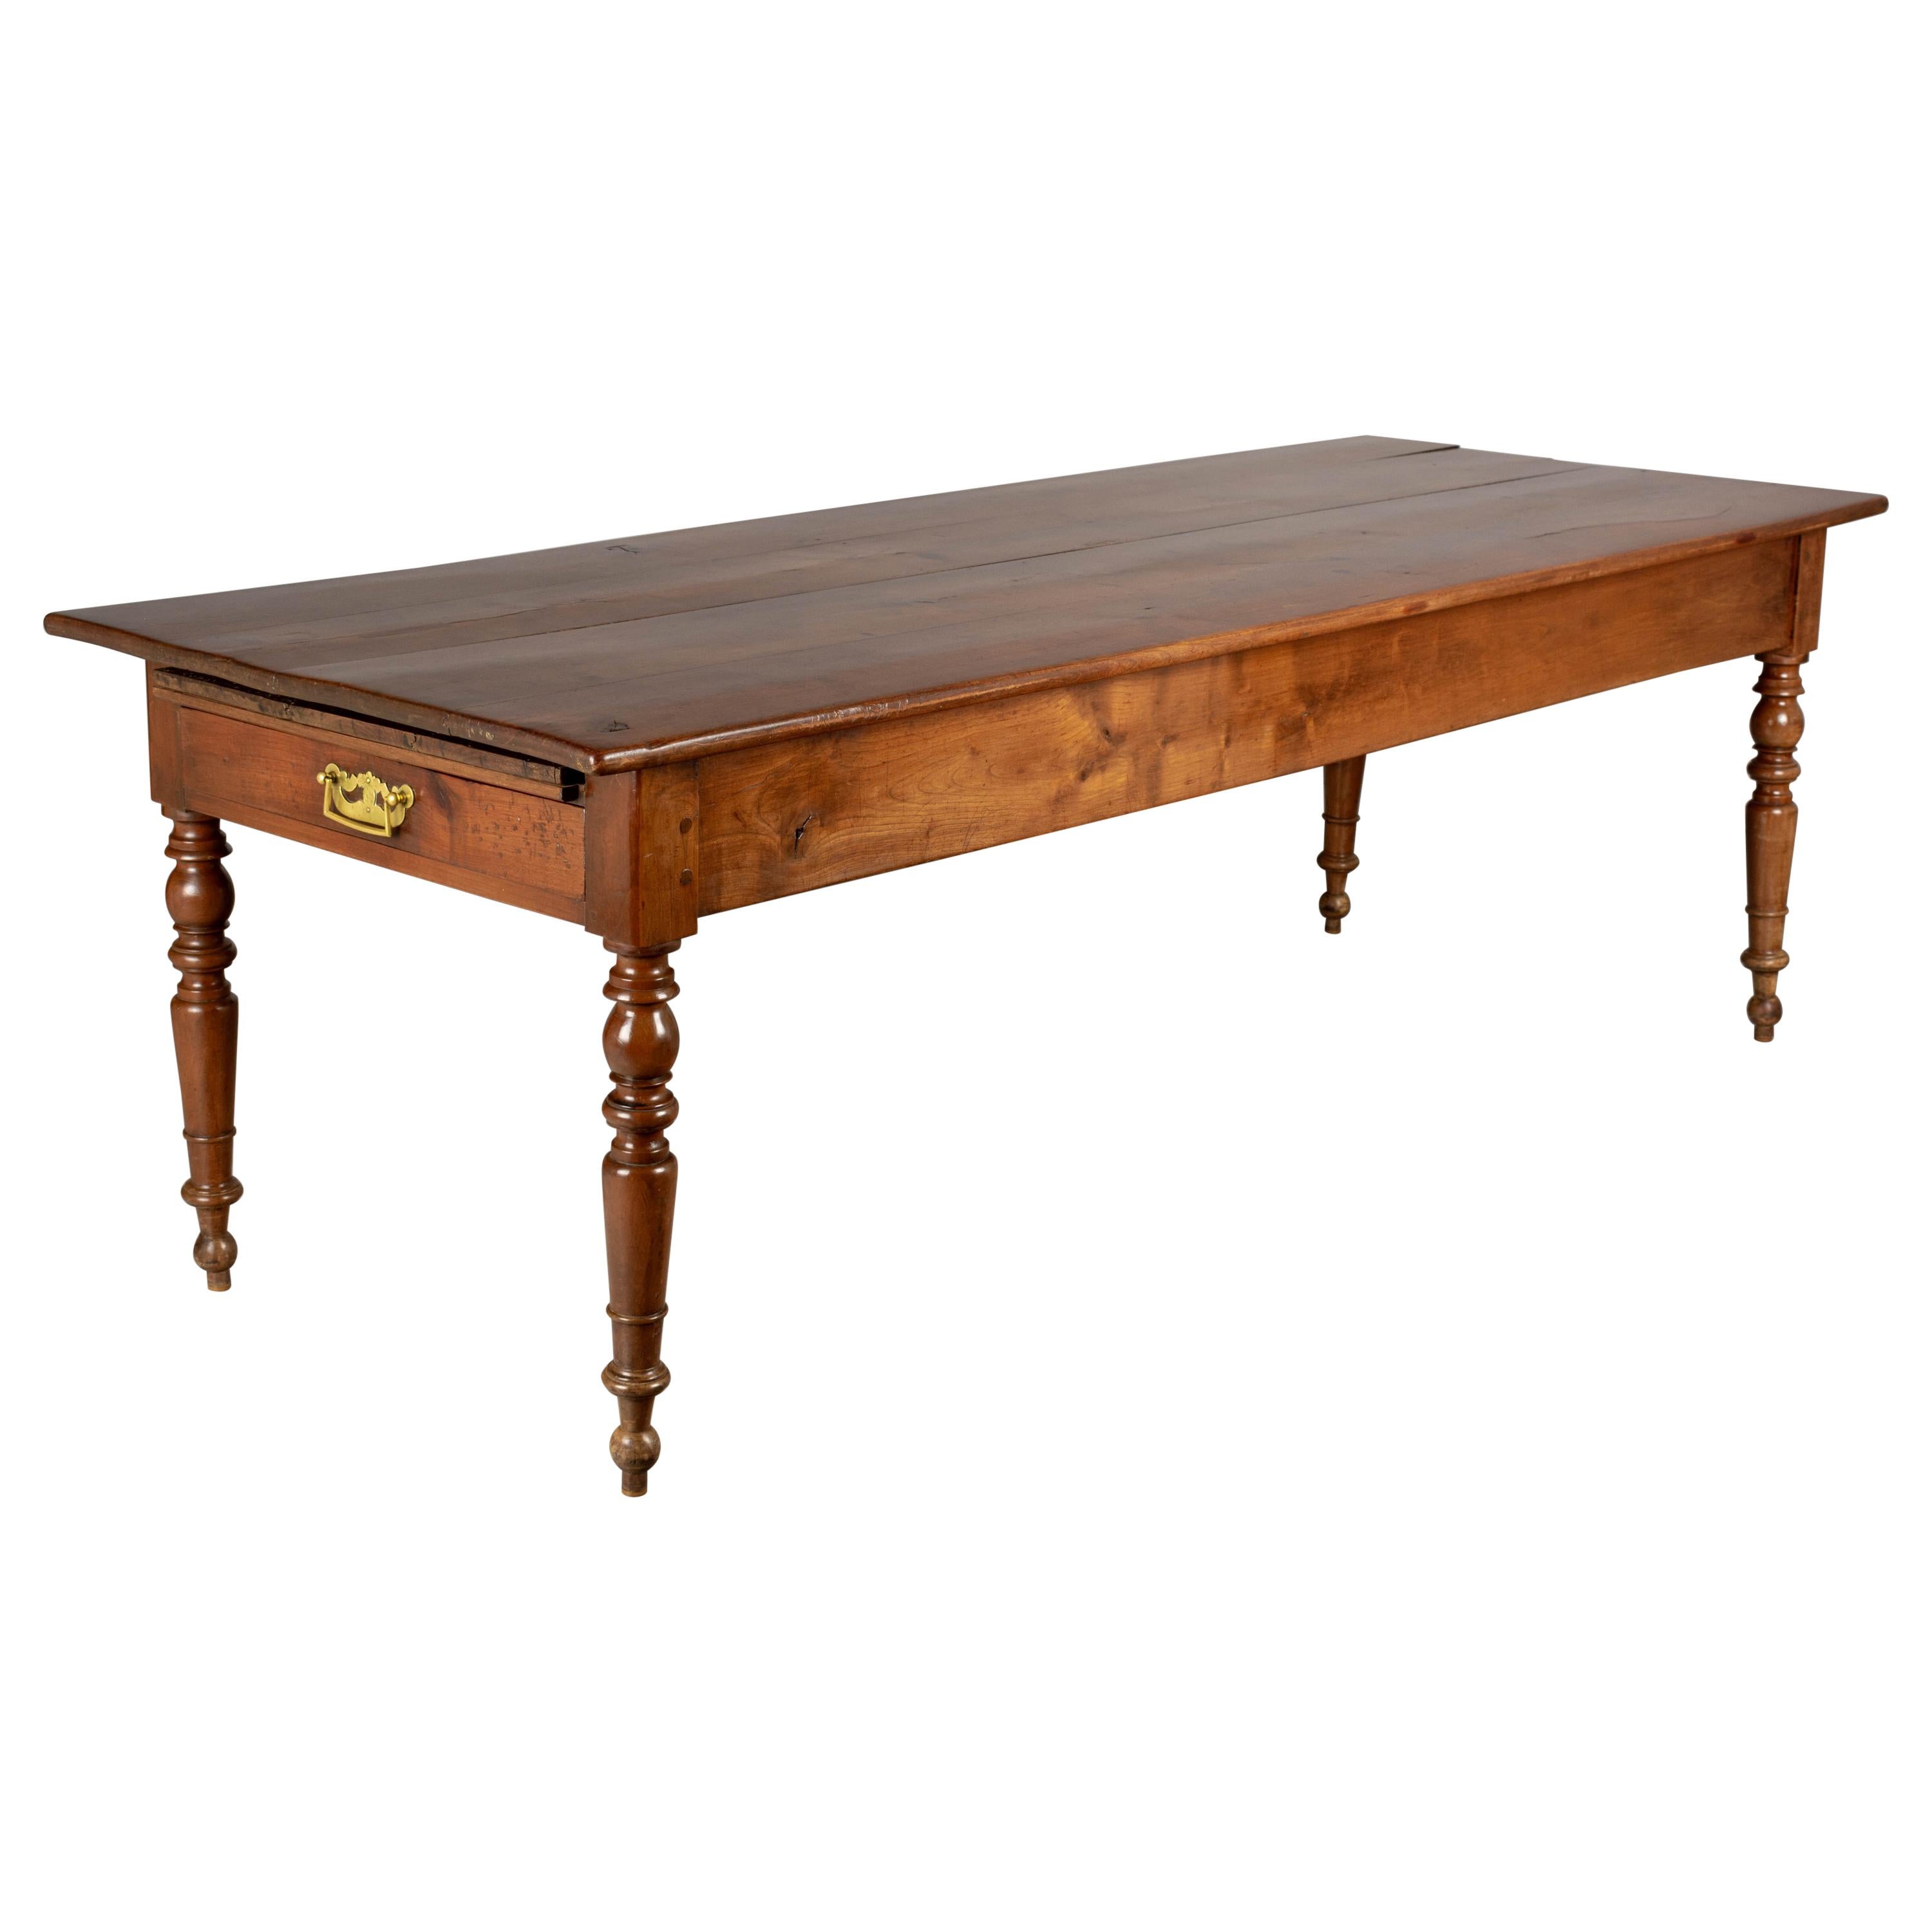 Country French Cherry Farm Table or Dining Table